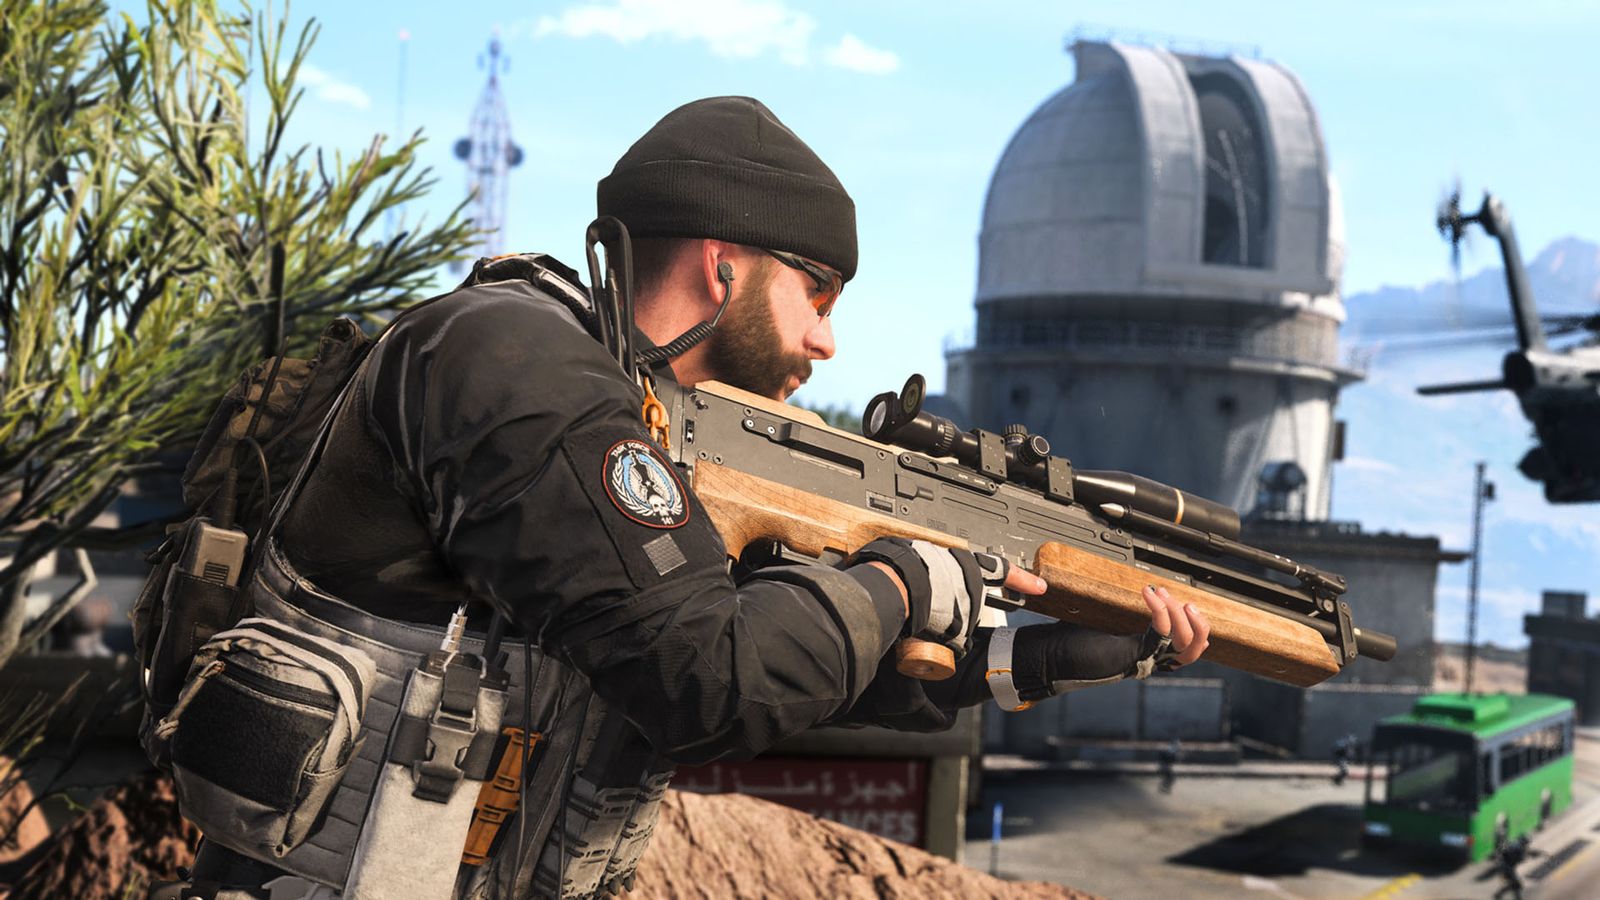 Call of Duty Captain Price carrying sniper rifle with Zaya Observatory in background